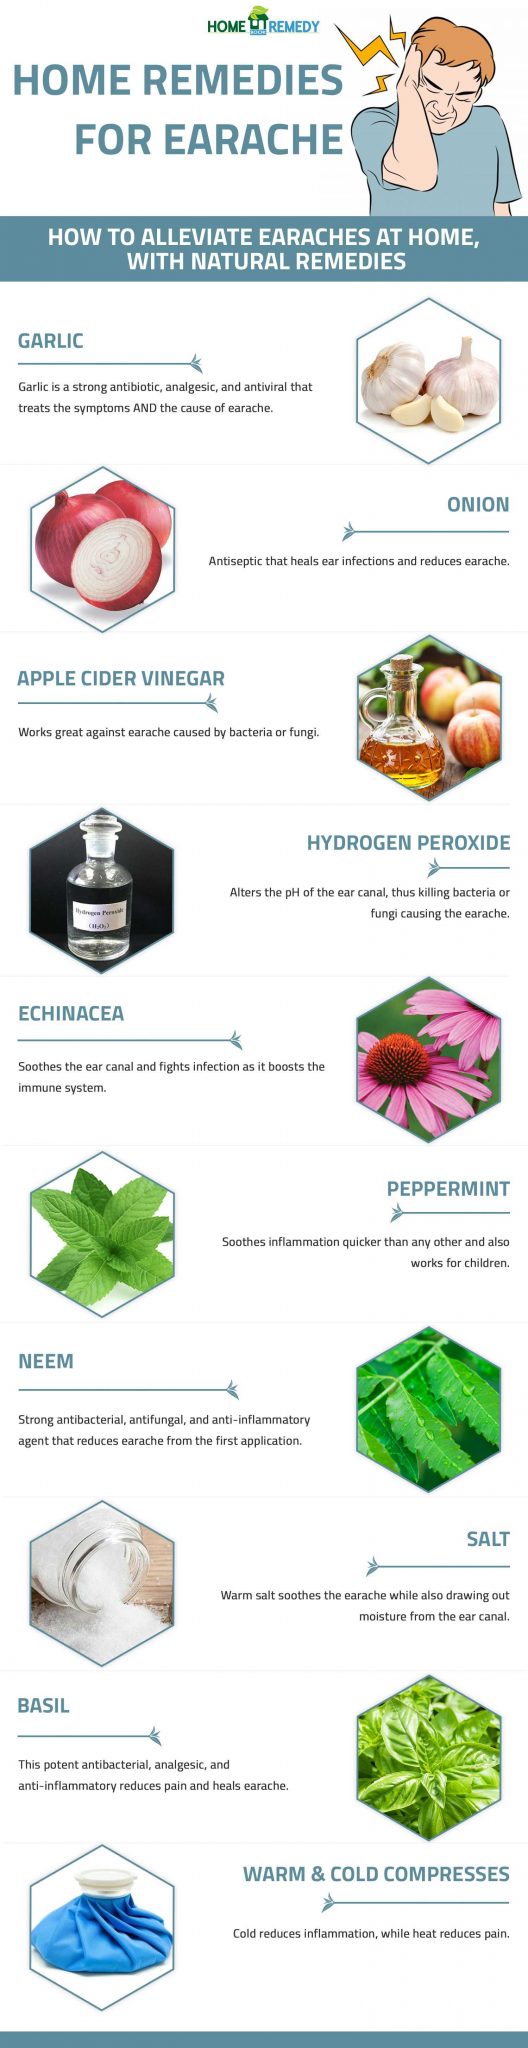 home remedies for earache infographic